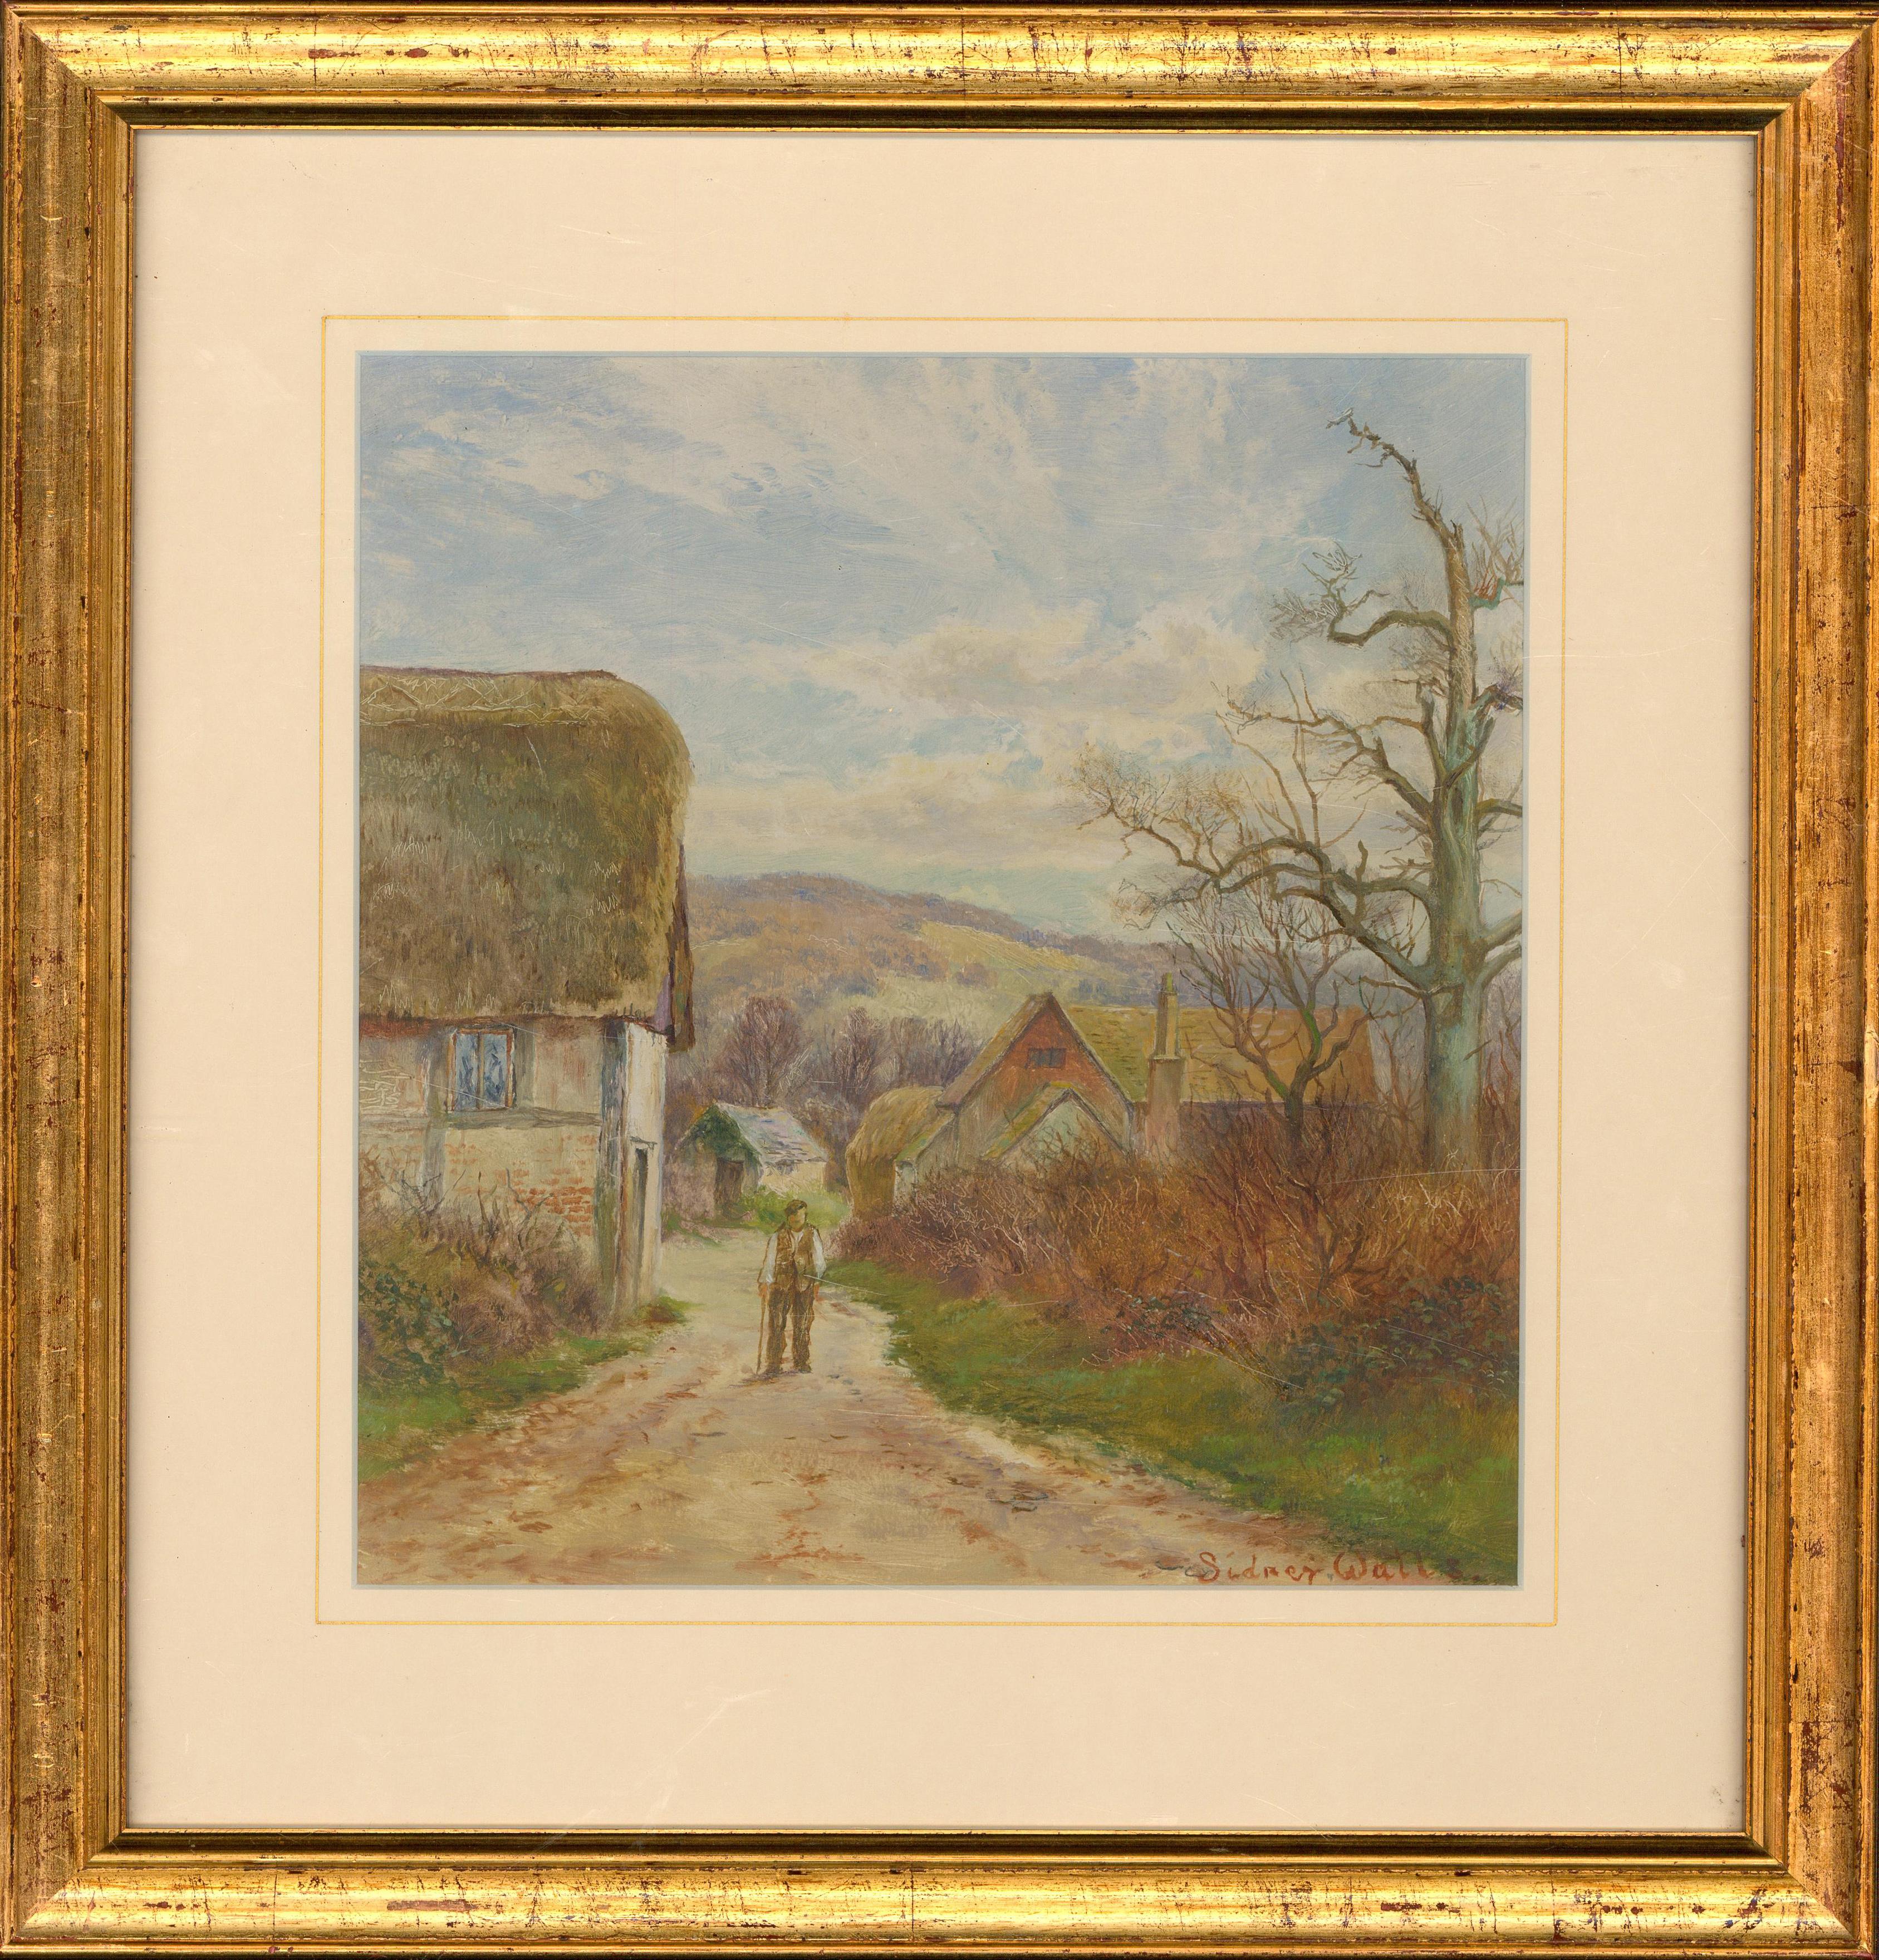 A pretty and quintessentially English scene in oil on paper showing a man taking a stroll through a hamlet surrounded by hills in late Autumn. The artist has a keen eye for colour and uses colour to great effect. He also employs sgraffito technique